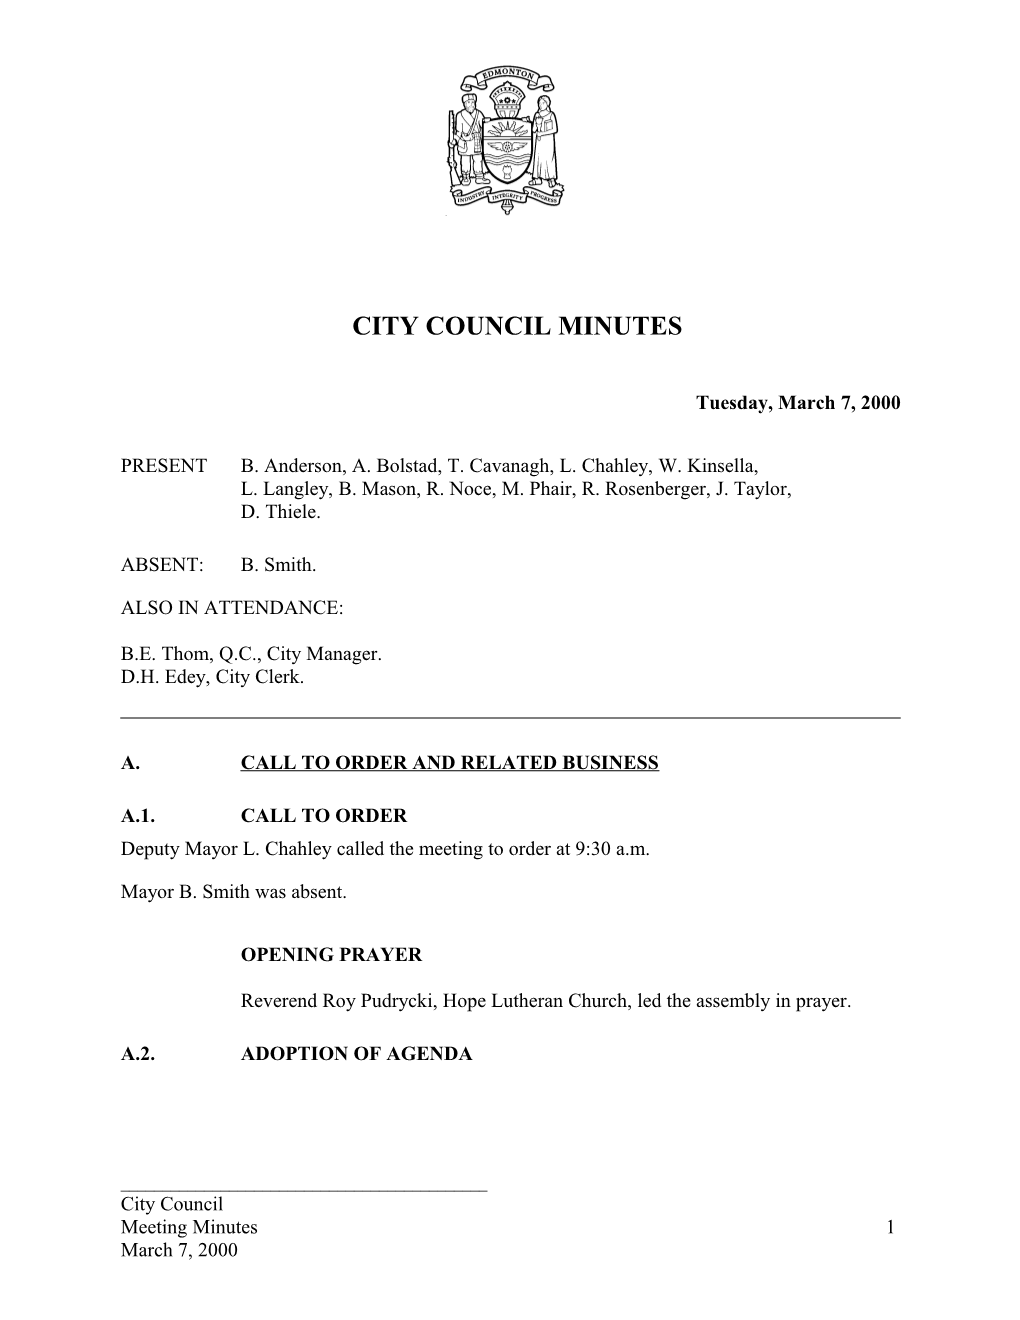 Minutes for City Council March 7, 2000 Meeting